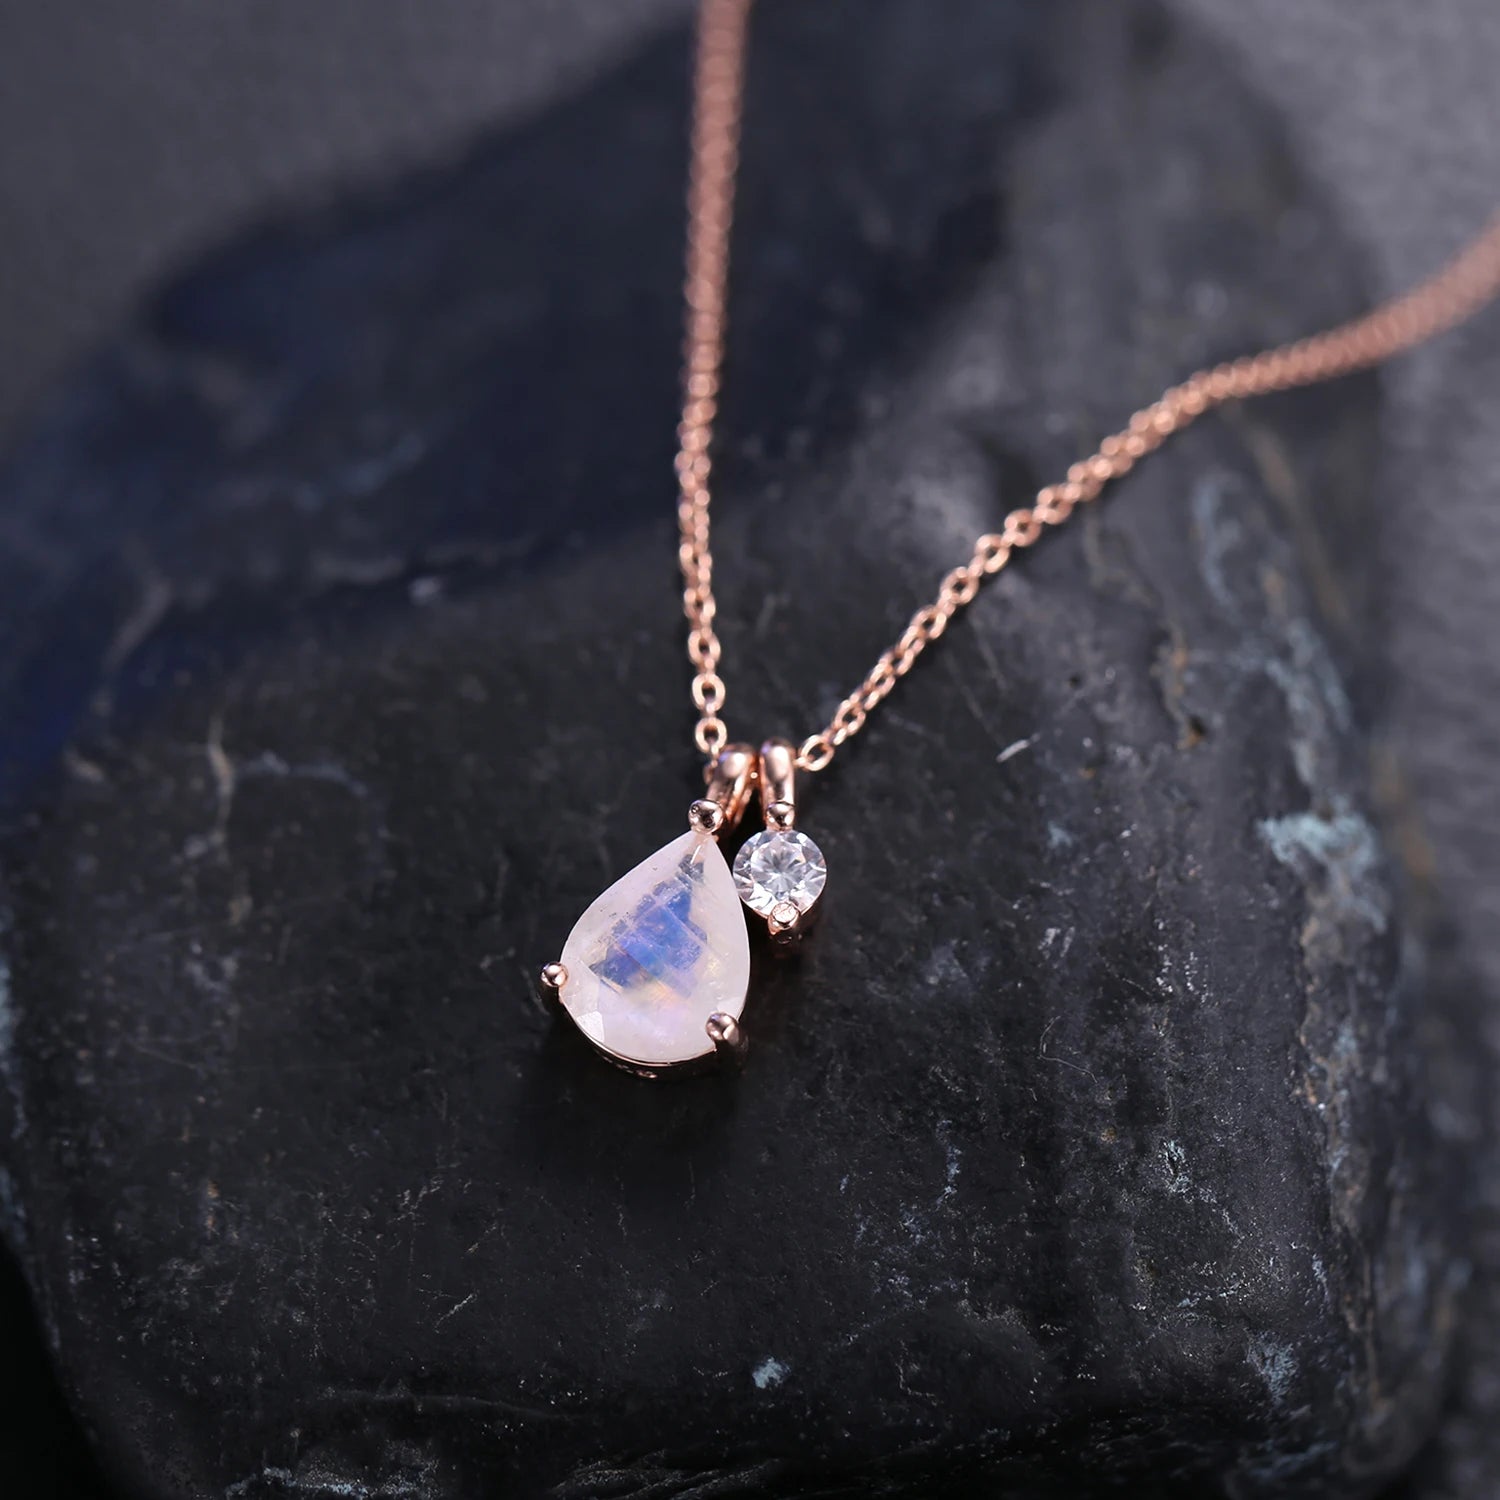 GEM'S BALLET Rainbow Moonstone Necklace in 925 Sterling Silver June Birthstone Jewelry Healing Crystal Neckalce Gift for Her